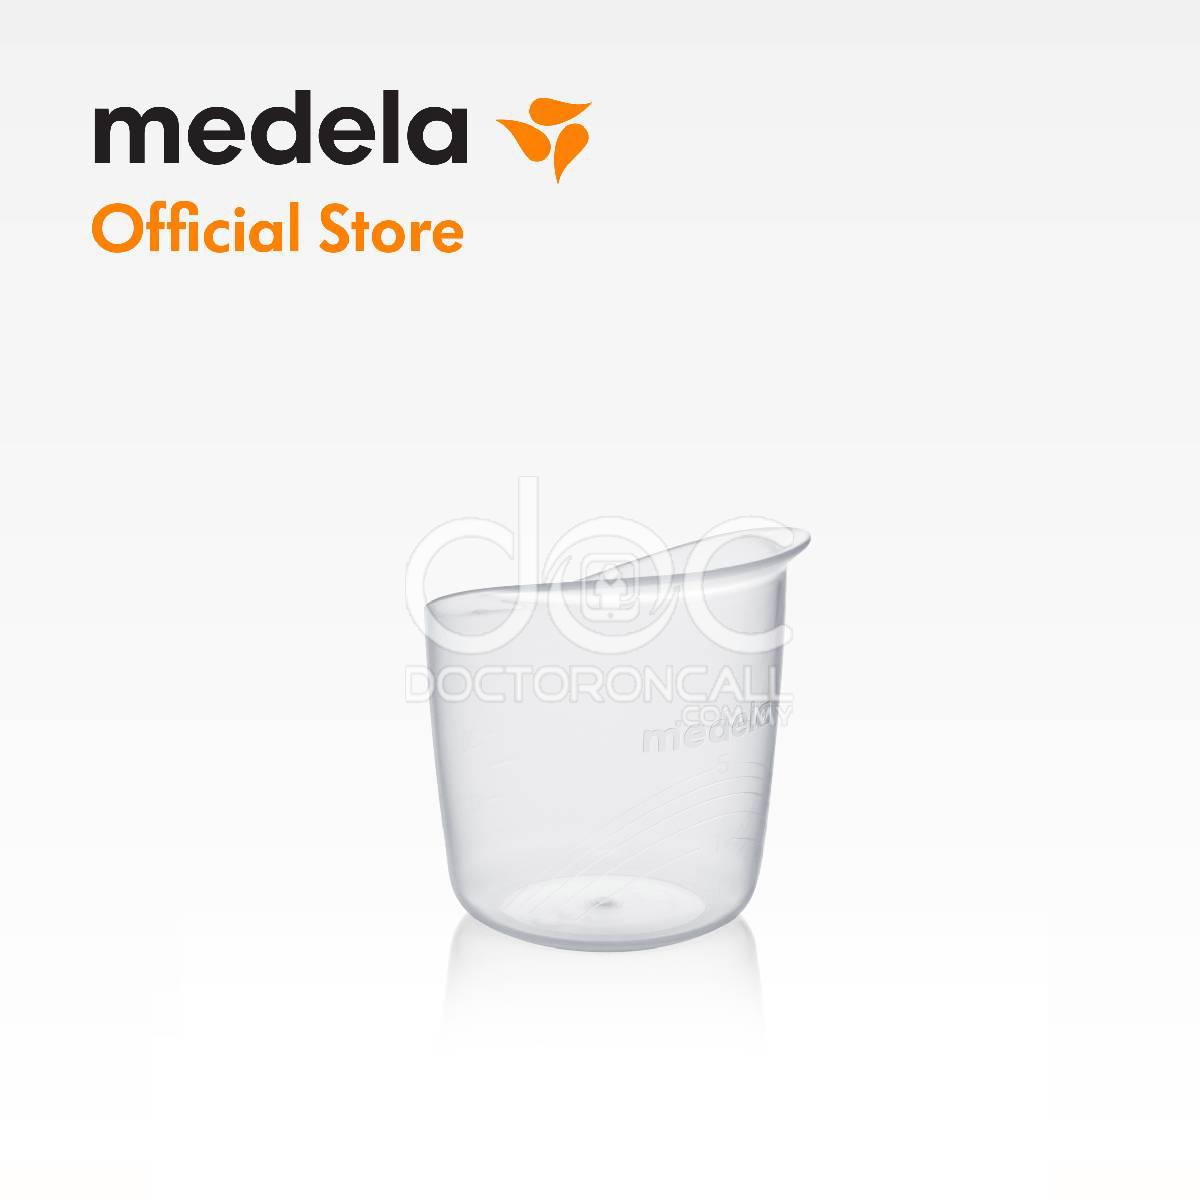 Medela Disposable Baby Cup Feeder 10s - DoctorOnCall Online Pharmacy